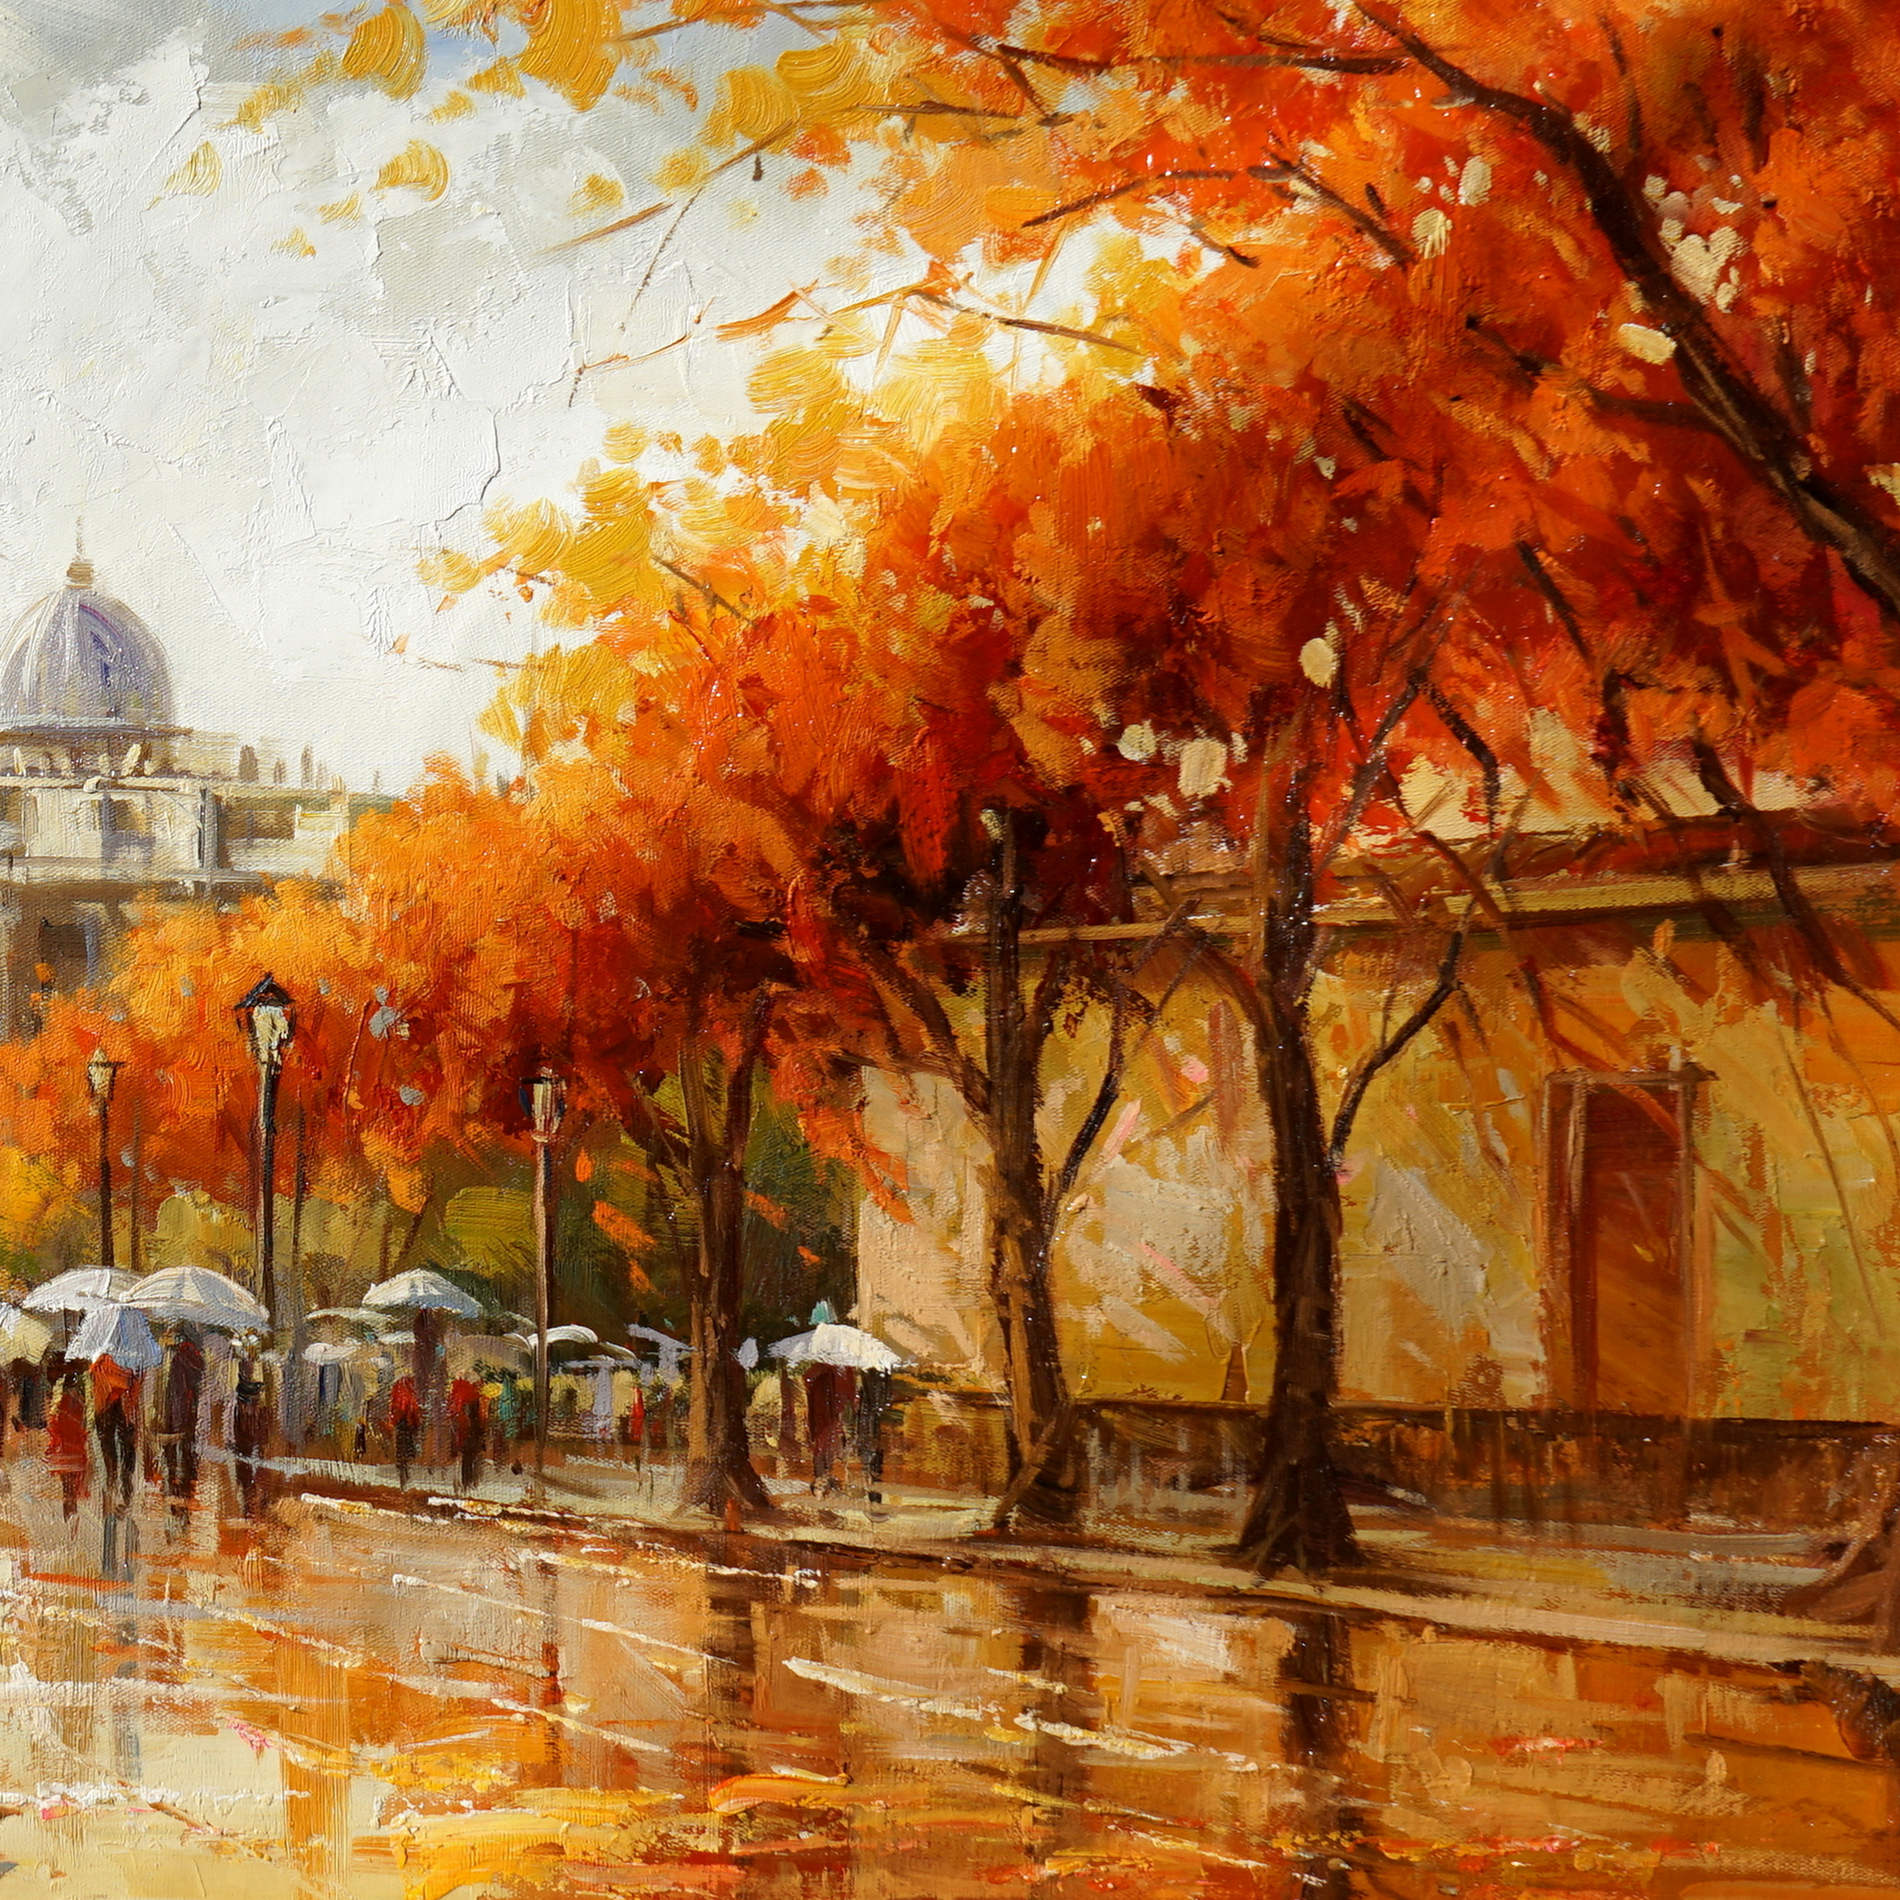 Hand painted Autumn in Rome 60x120cm